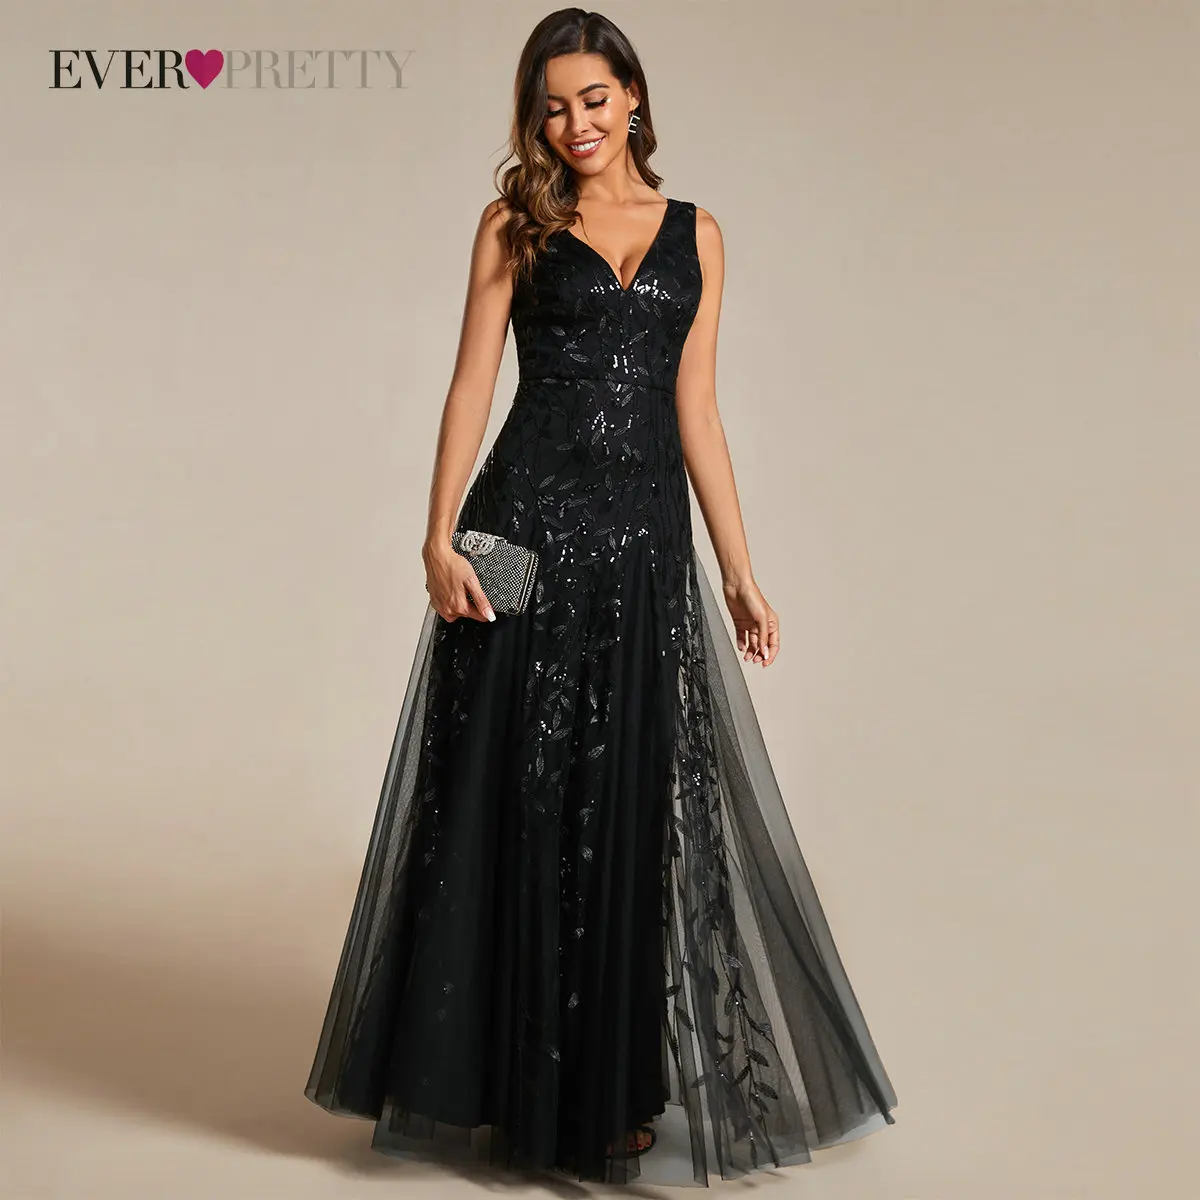 

Ever Pretty Elegant A Line V Neck Sleeveless Sequin Evening Dresses Sparkly Embroidery Long Party Dress For Women robe de soiree